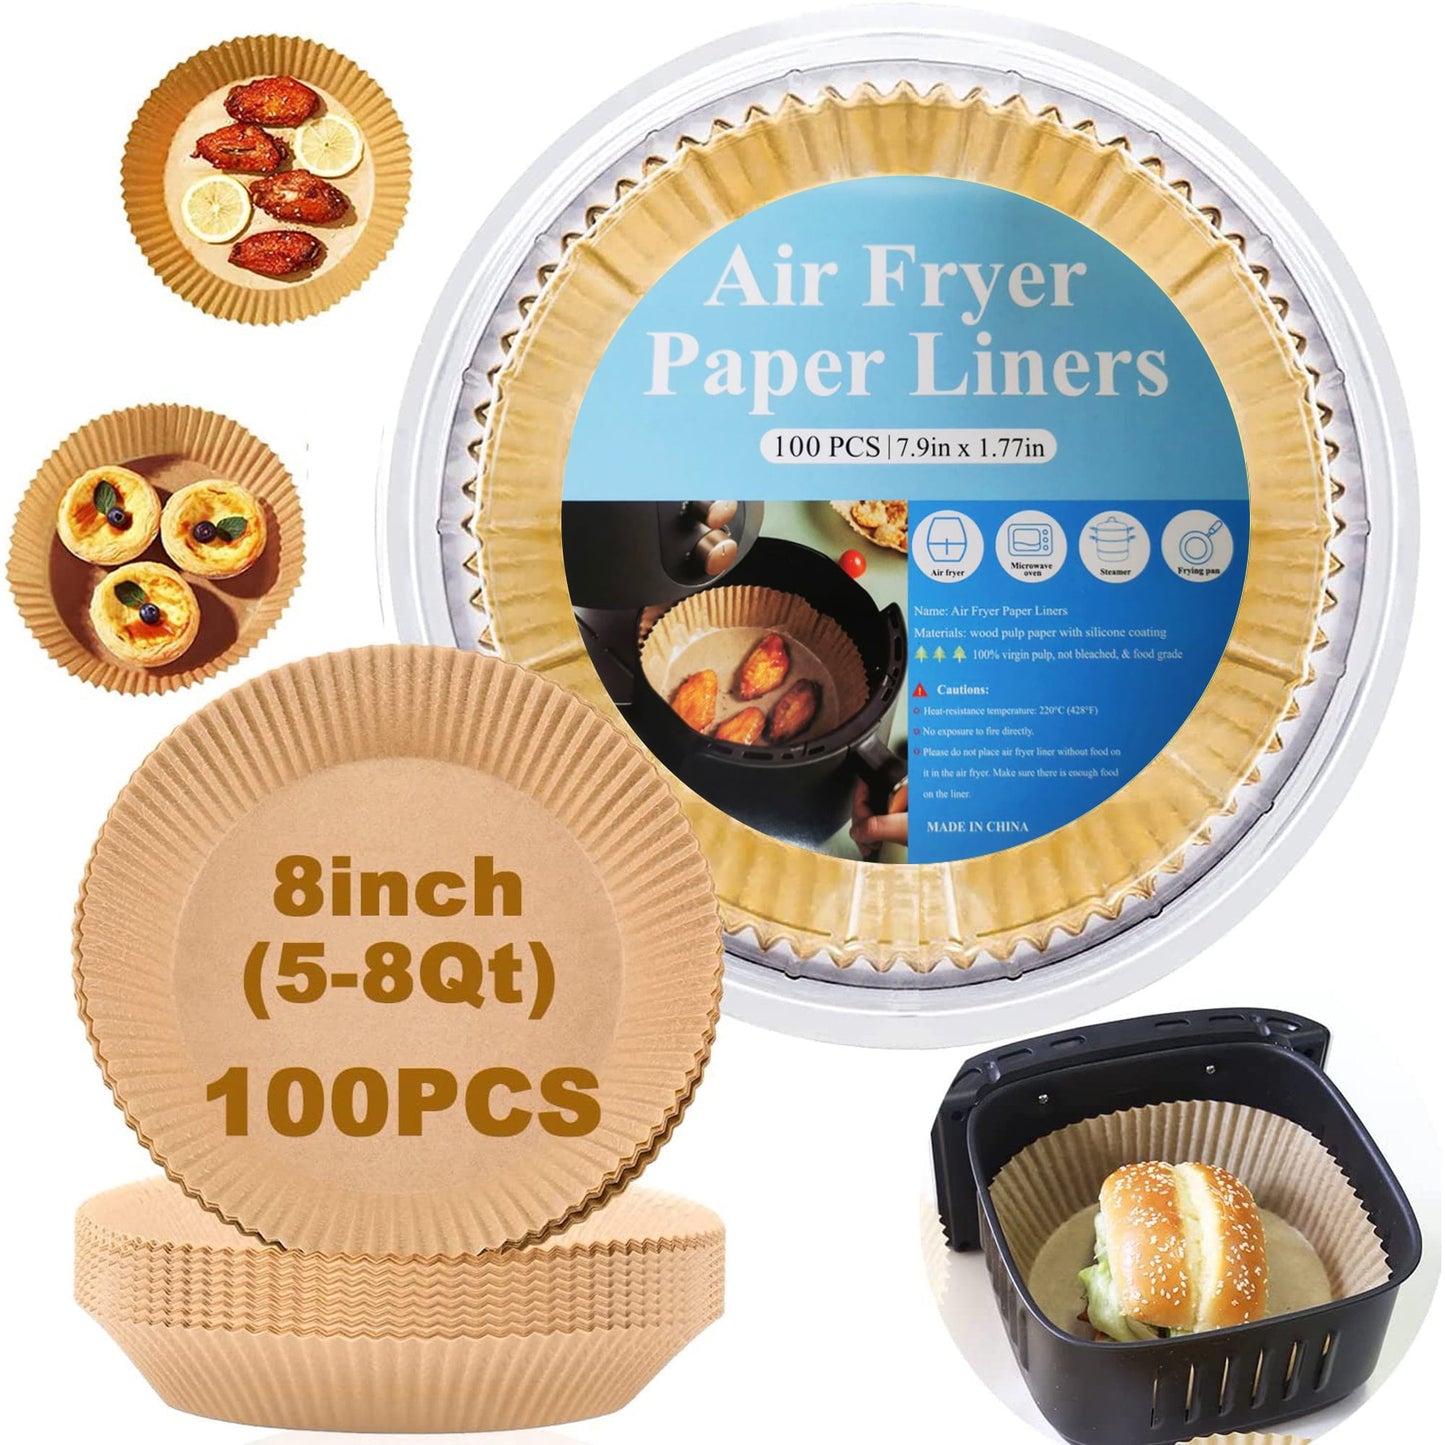 M BUDER Air Fryer Disposable Paper Liners, 100PCS Non-Stick Air Fryer Parchment Liner, Oil Resistant, Waterproof, Food Grade Baking Paper for 5-8 QT Air Fryer Baking Roasting Microwave 8inch